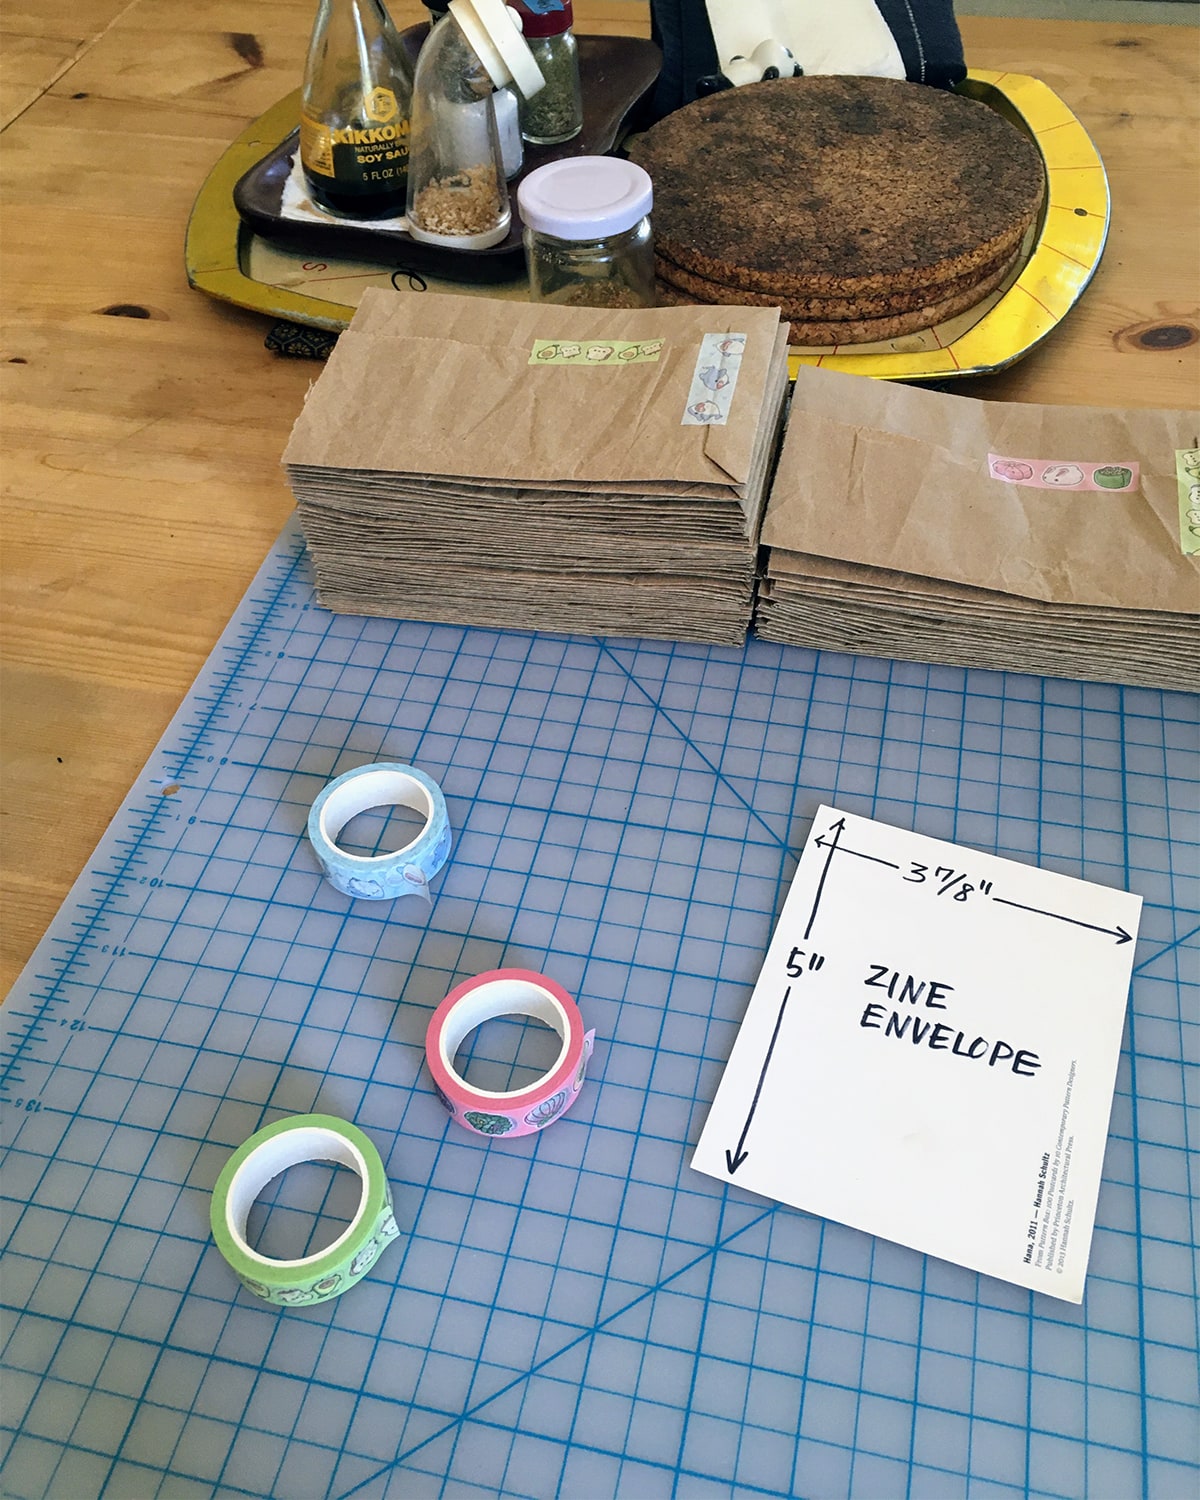 A photo of cutting mat on the kitchen table. On the mat there are two stacks of envelopes made from old recycled paper packing materials. The envelopes are held together with washi tape from KyariKreations on Etsy, a few rolls of which are also on the mat. There is also a zine-shaped pattern made from an old postcard, used as a guide for making the envelopes, which are for sending the zines.